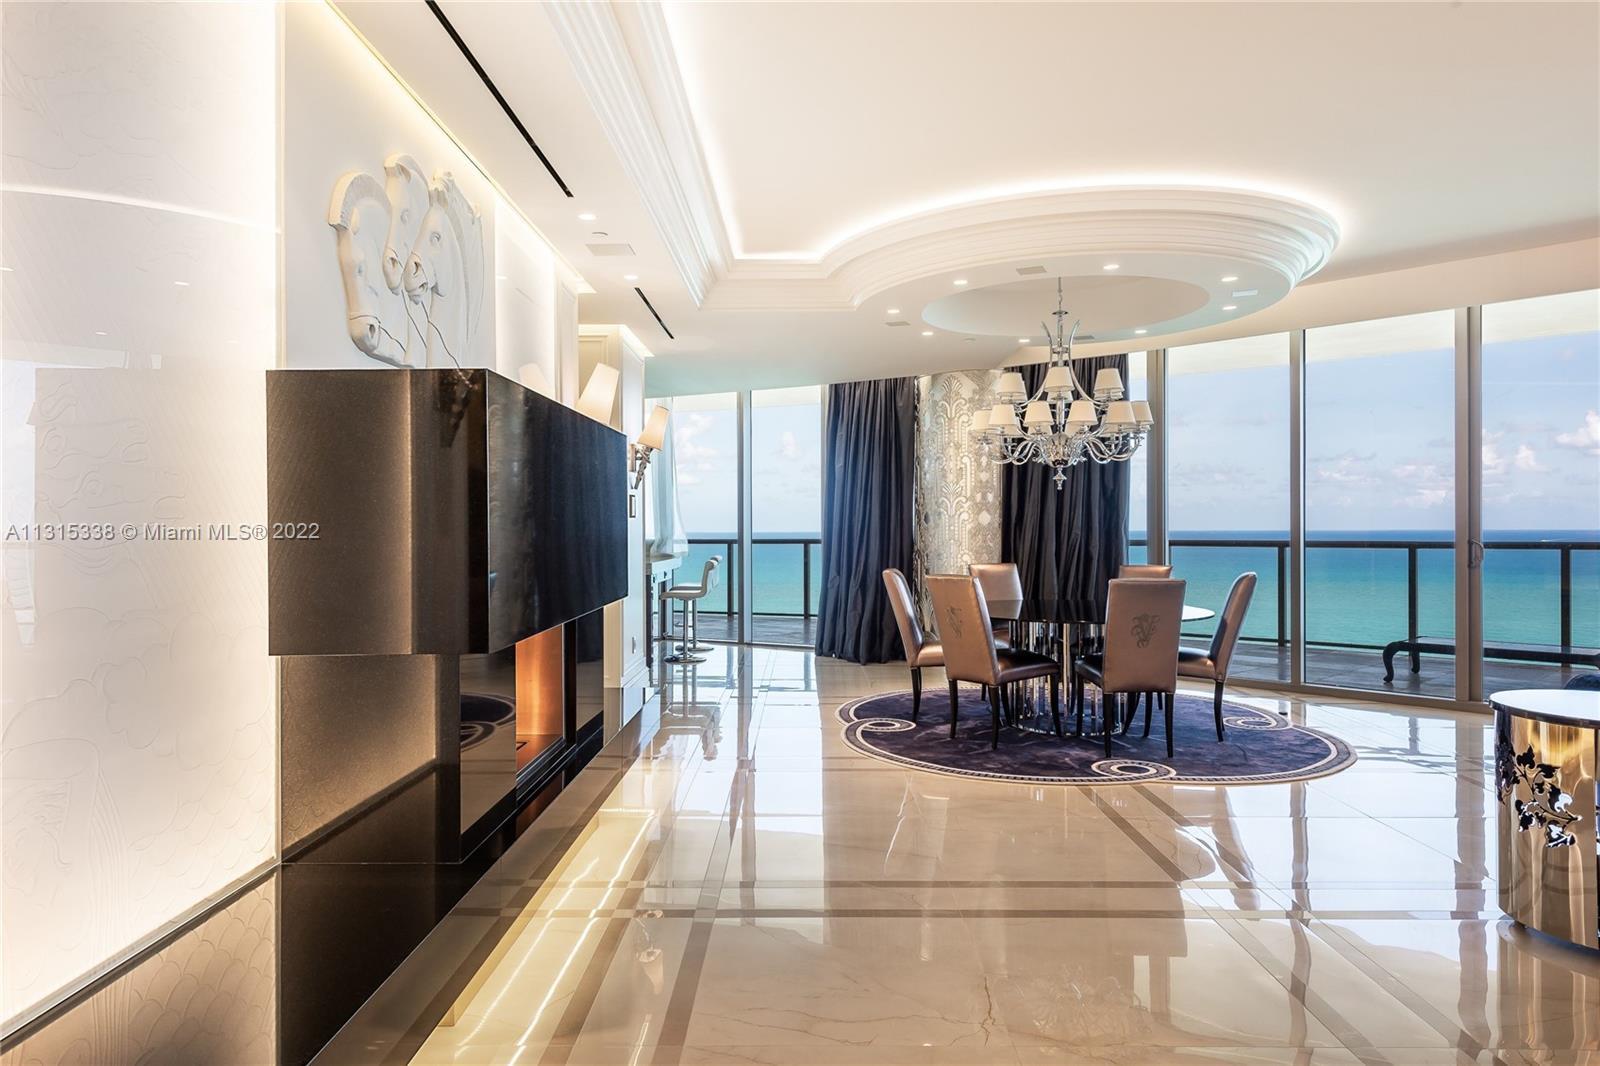 Do not miss the opportunity to own this rare 3/3.5 unit in the famous St. Regis of Bal Harbour. Desi